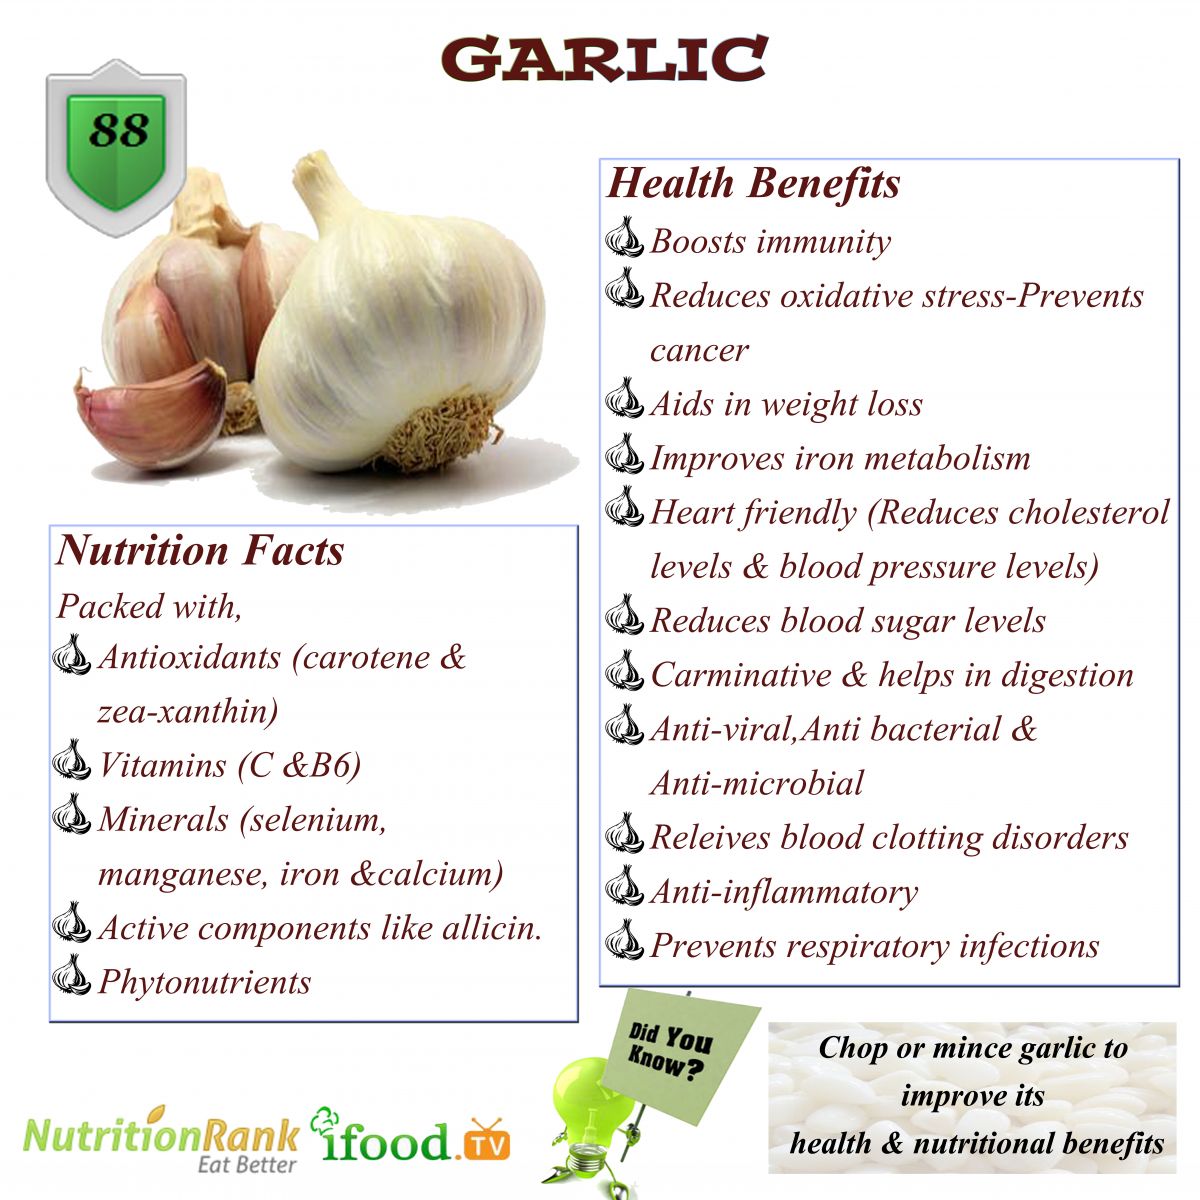 Studies shown increased #garlic intake can reduce chances of certain #cancers like stomach, pancreas, colon, breast and esophagus: seattleorganicrestaurants.com/vegan-whole-fo… #medicine #food #HealthyLiving #healthylifestyle